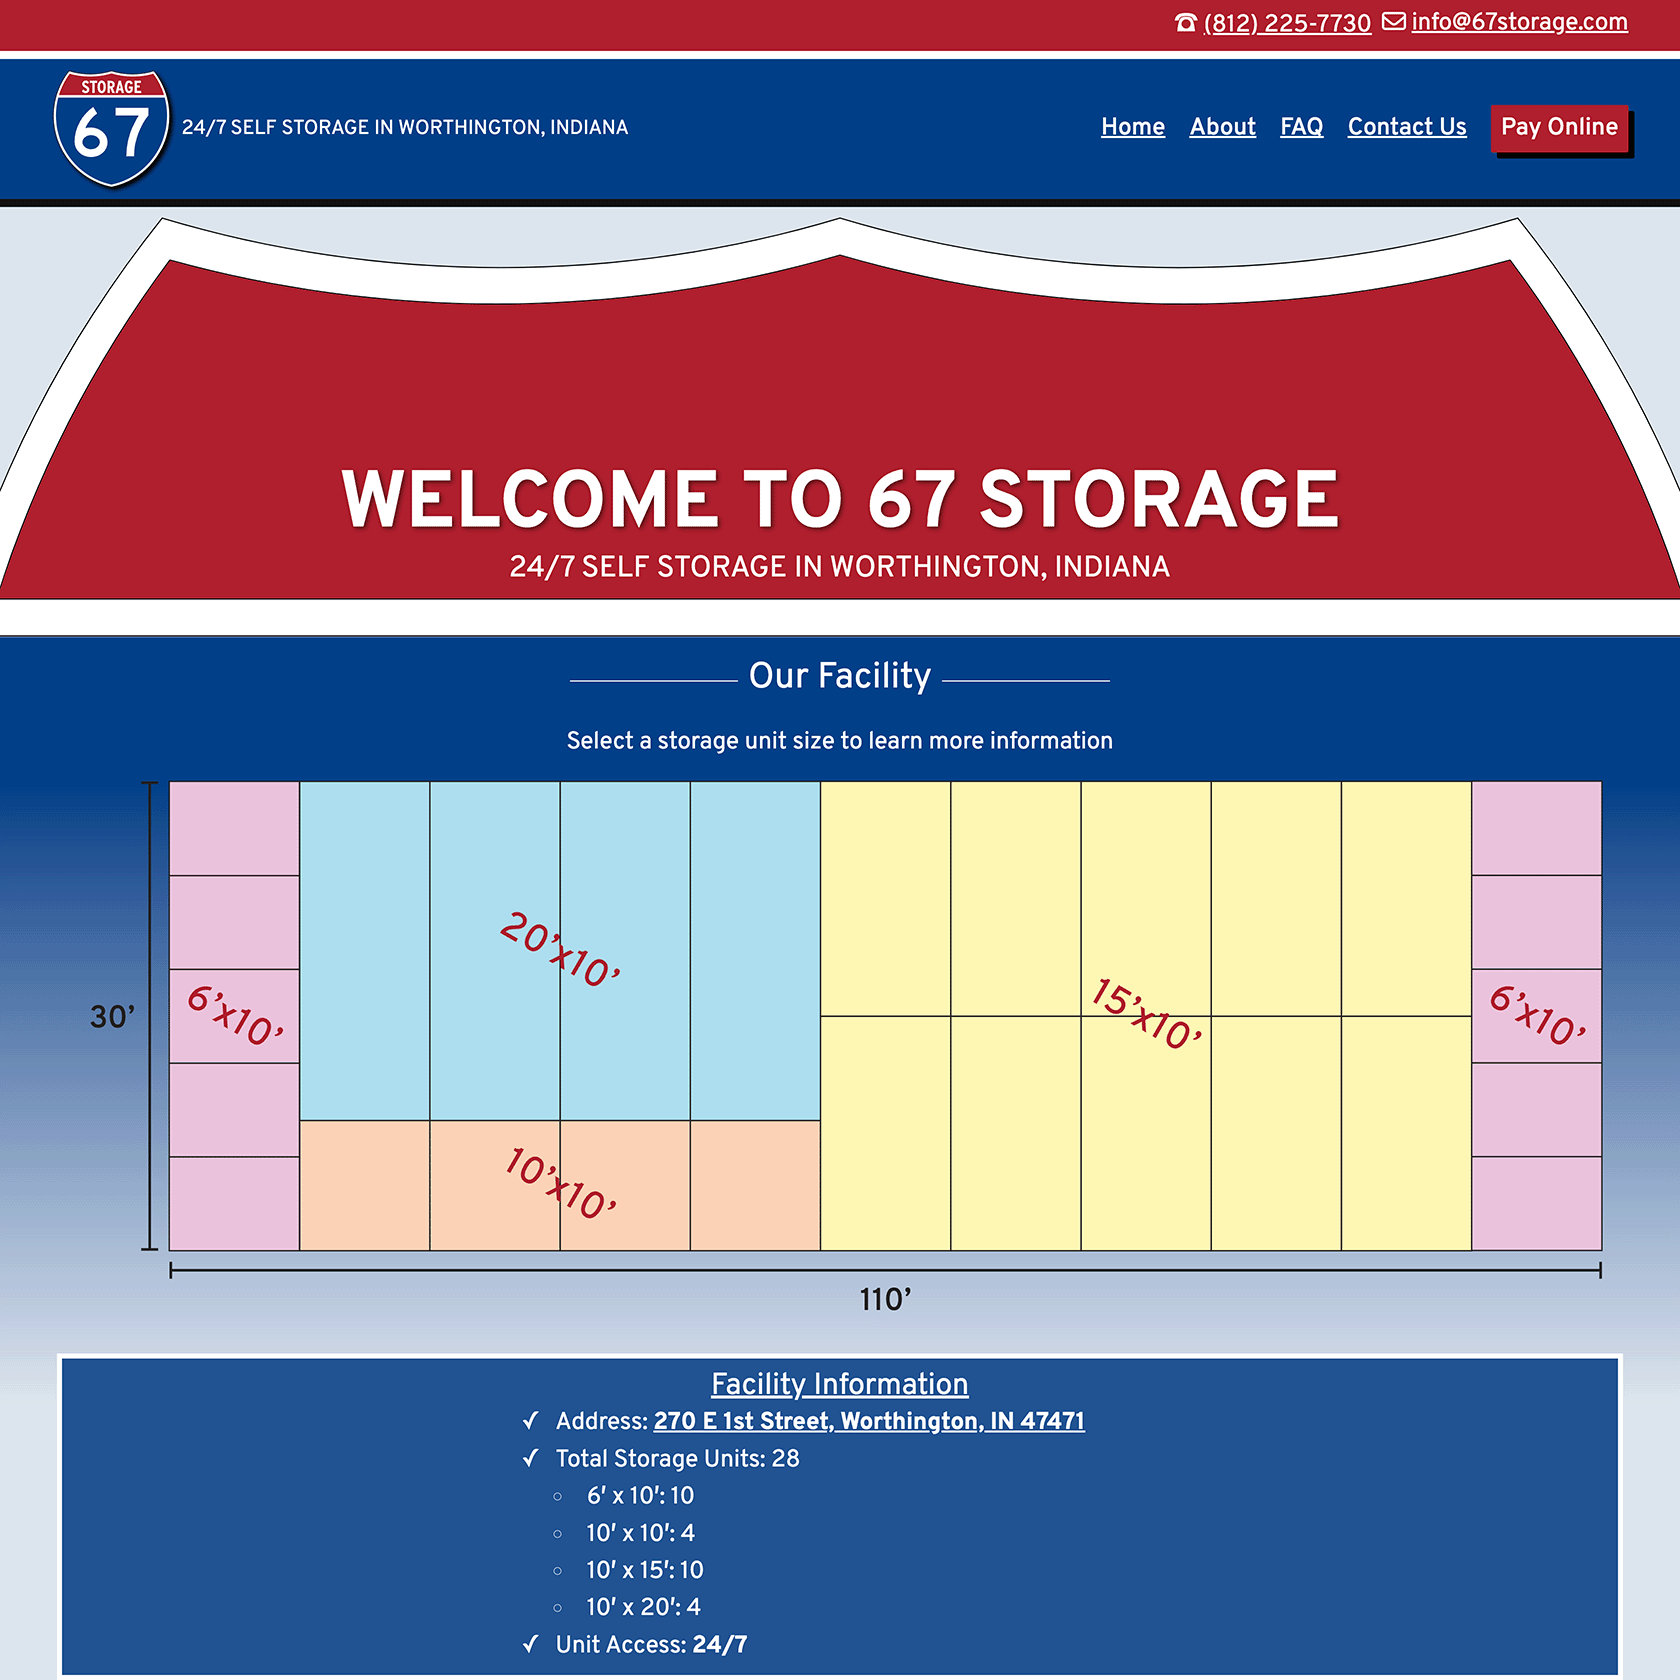 Screenshot of 67 Storage's homepage featuring a welcome message, a diagram of available storage unit sizes, and facility information including address, total units, and 24/7 access.